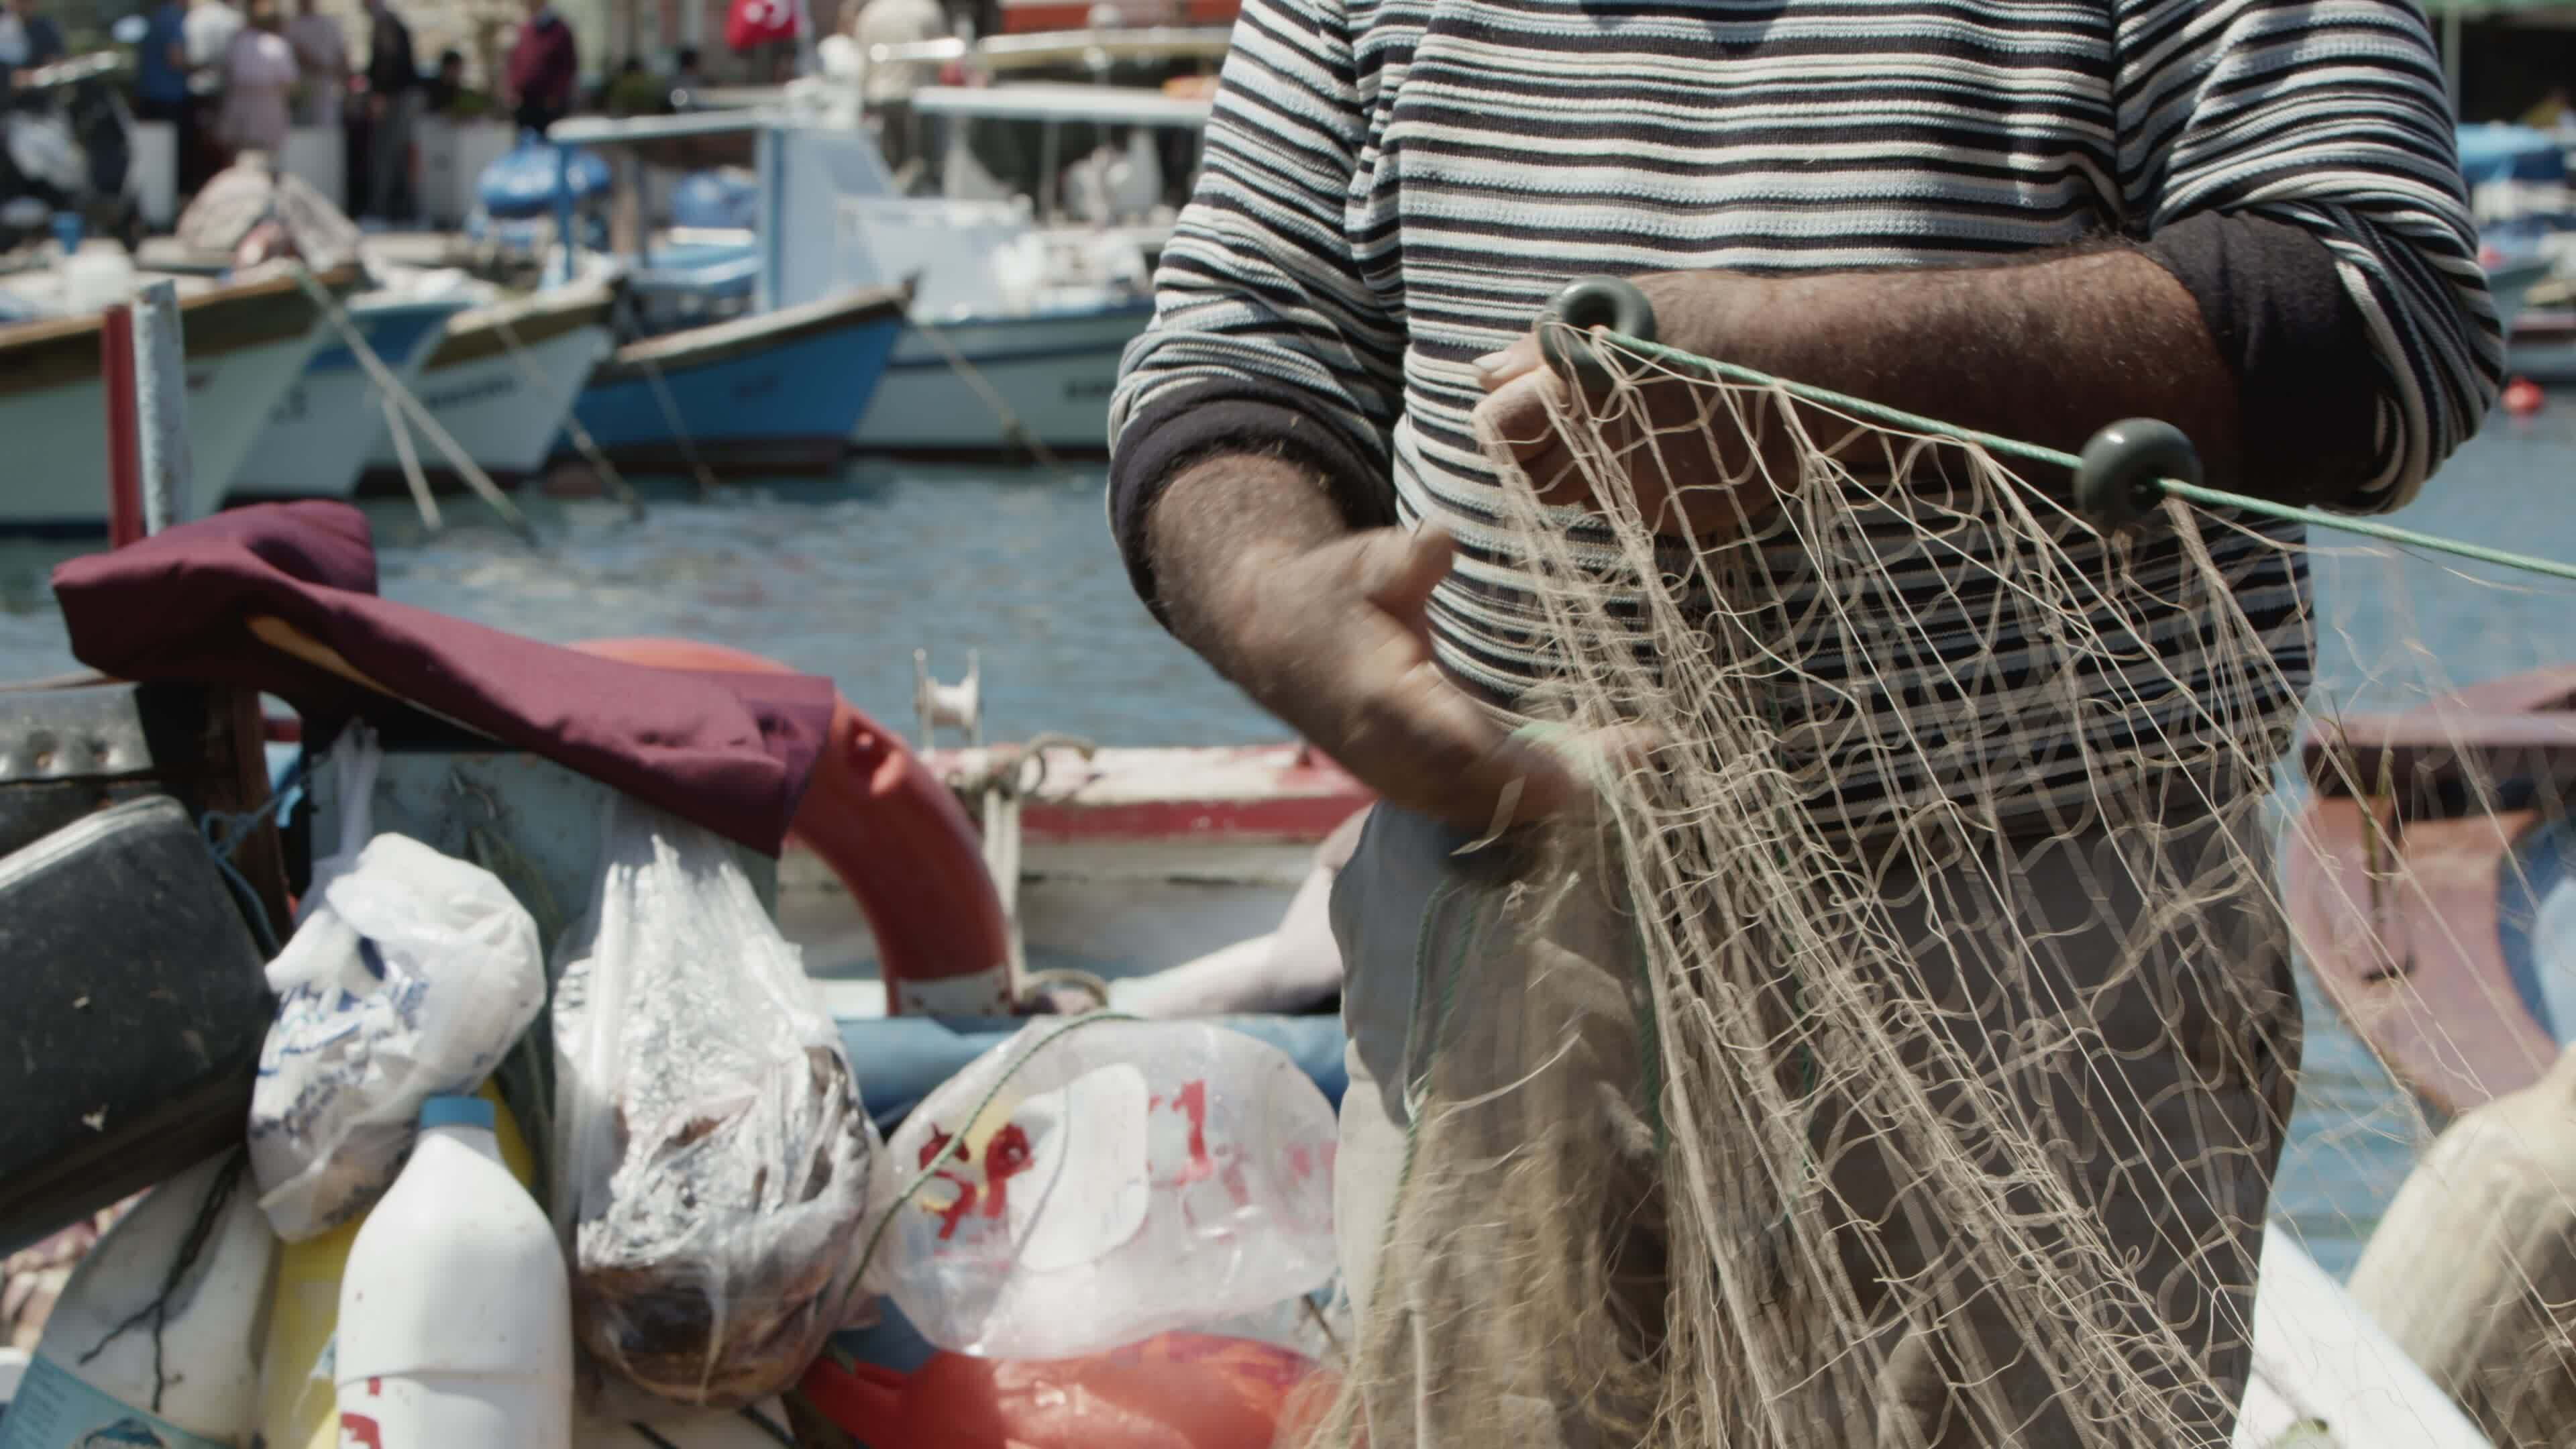 https://static.vecteezy.com/system/resources/thumbnails/023/503/359/original/fisherman-is-repairing-fishnets-on-fishing-boat-in-dock-video.jpg